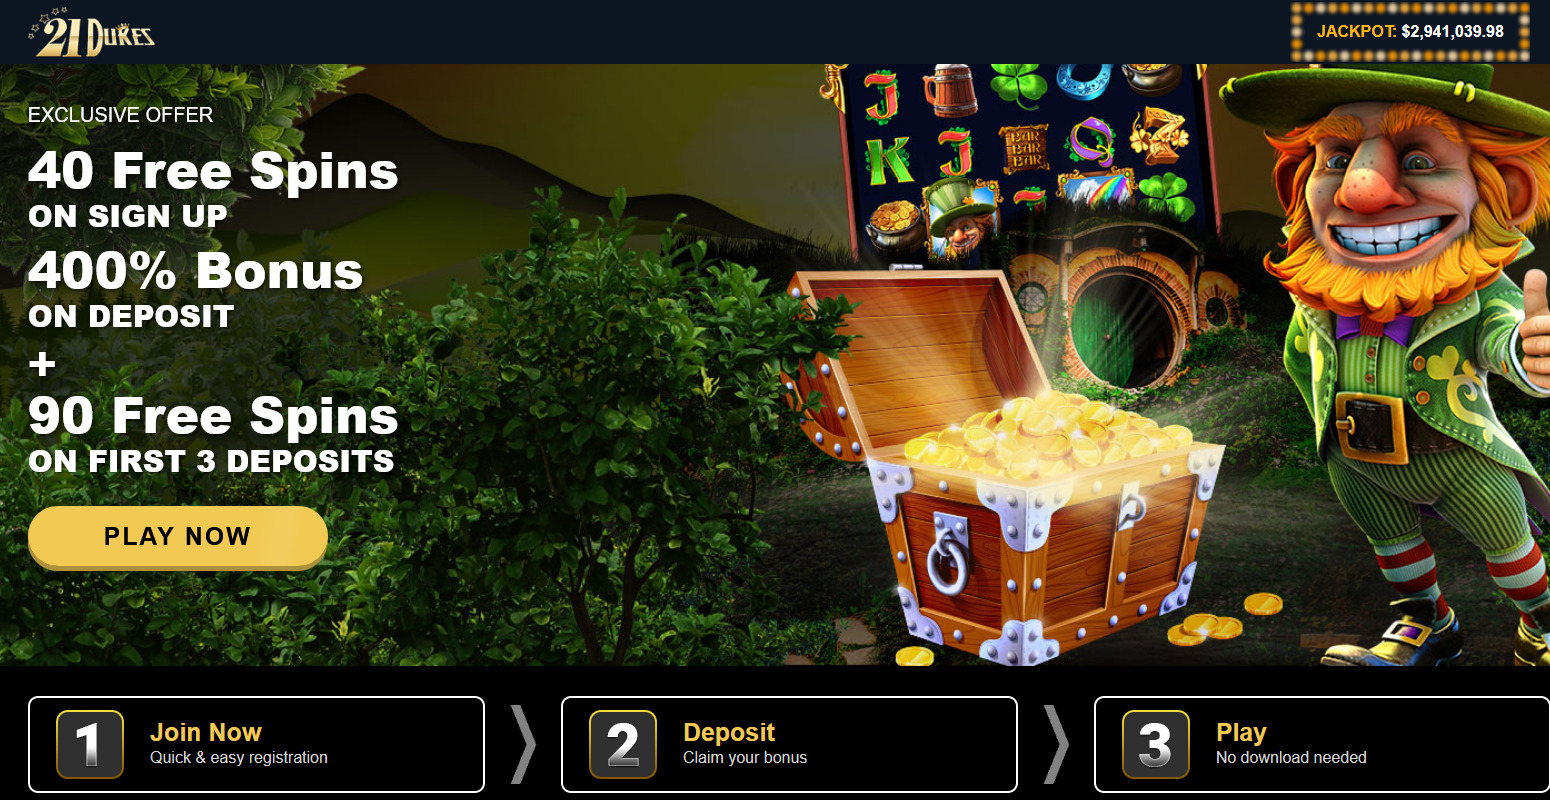 EXCLUSIVE OFFER 40 Free Spins ON SIGN UP 400% Bonus ON DEPOSIT + 90 Free Spins ON FIRST 3 DEPOSITS